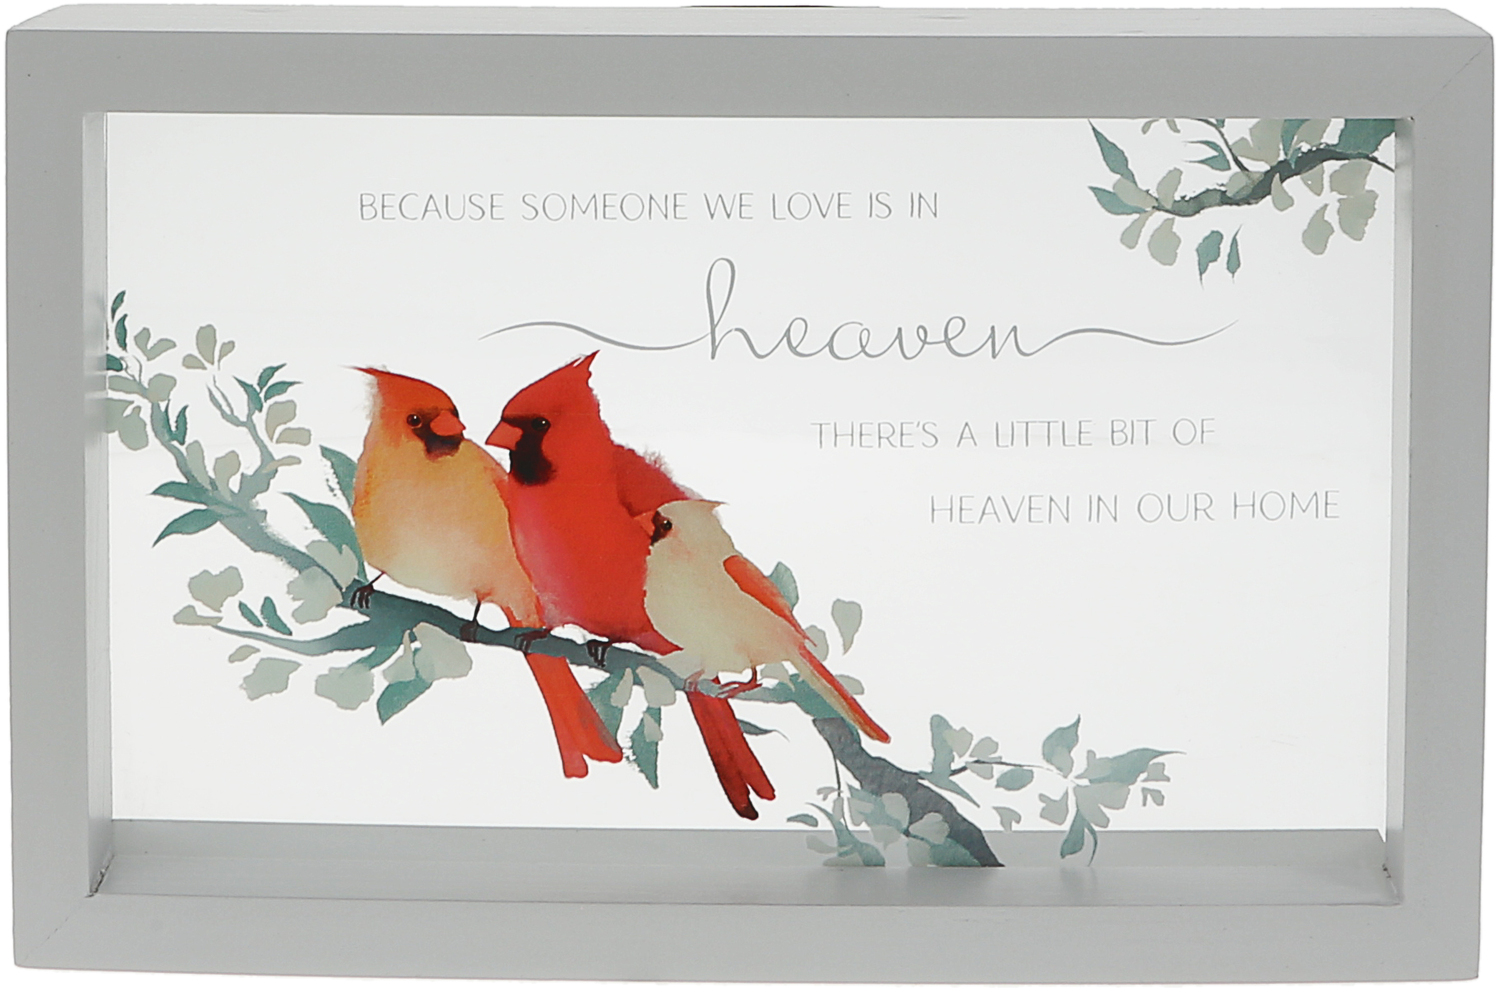 Heaven In Our Home by Always by Your Side - Heaven In Our Home - 8.5" x 5.5" Framed Glass Plaque